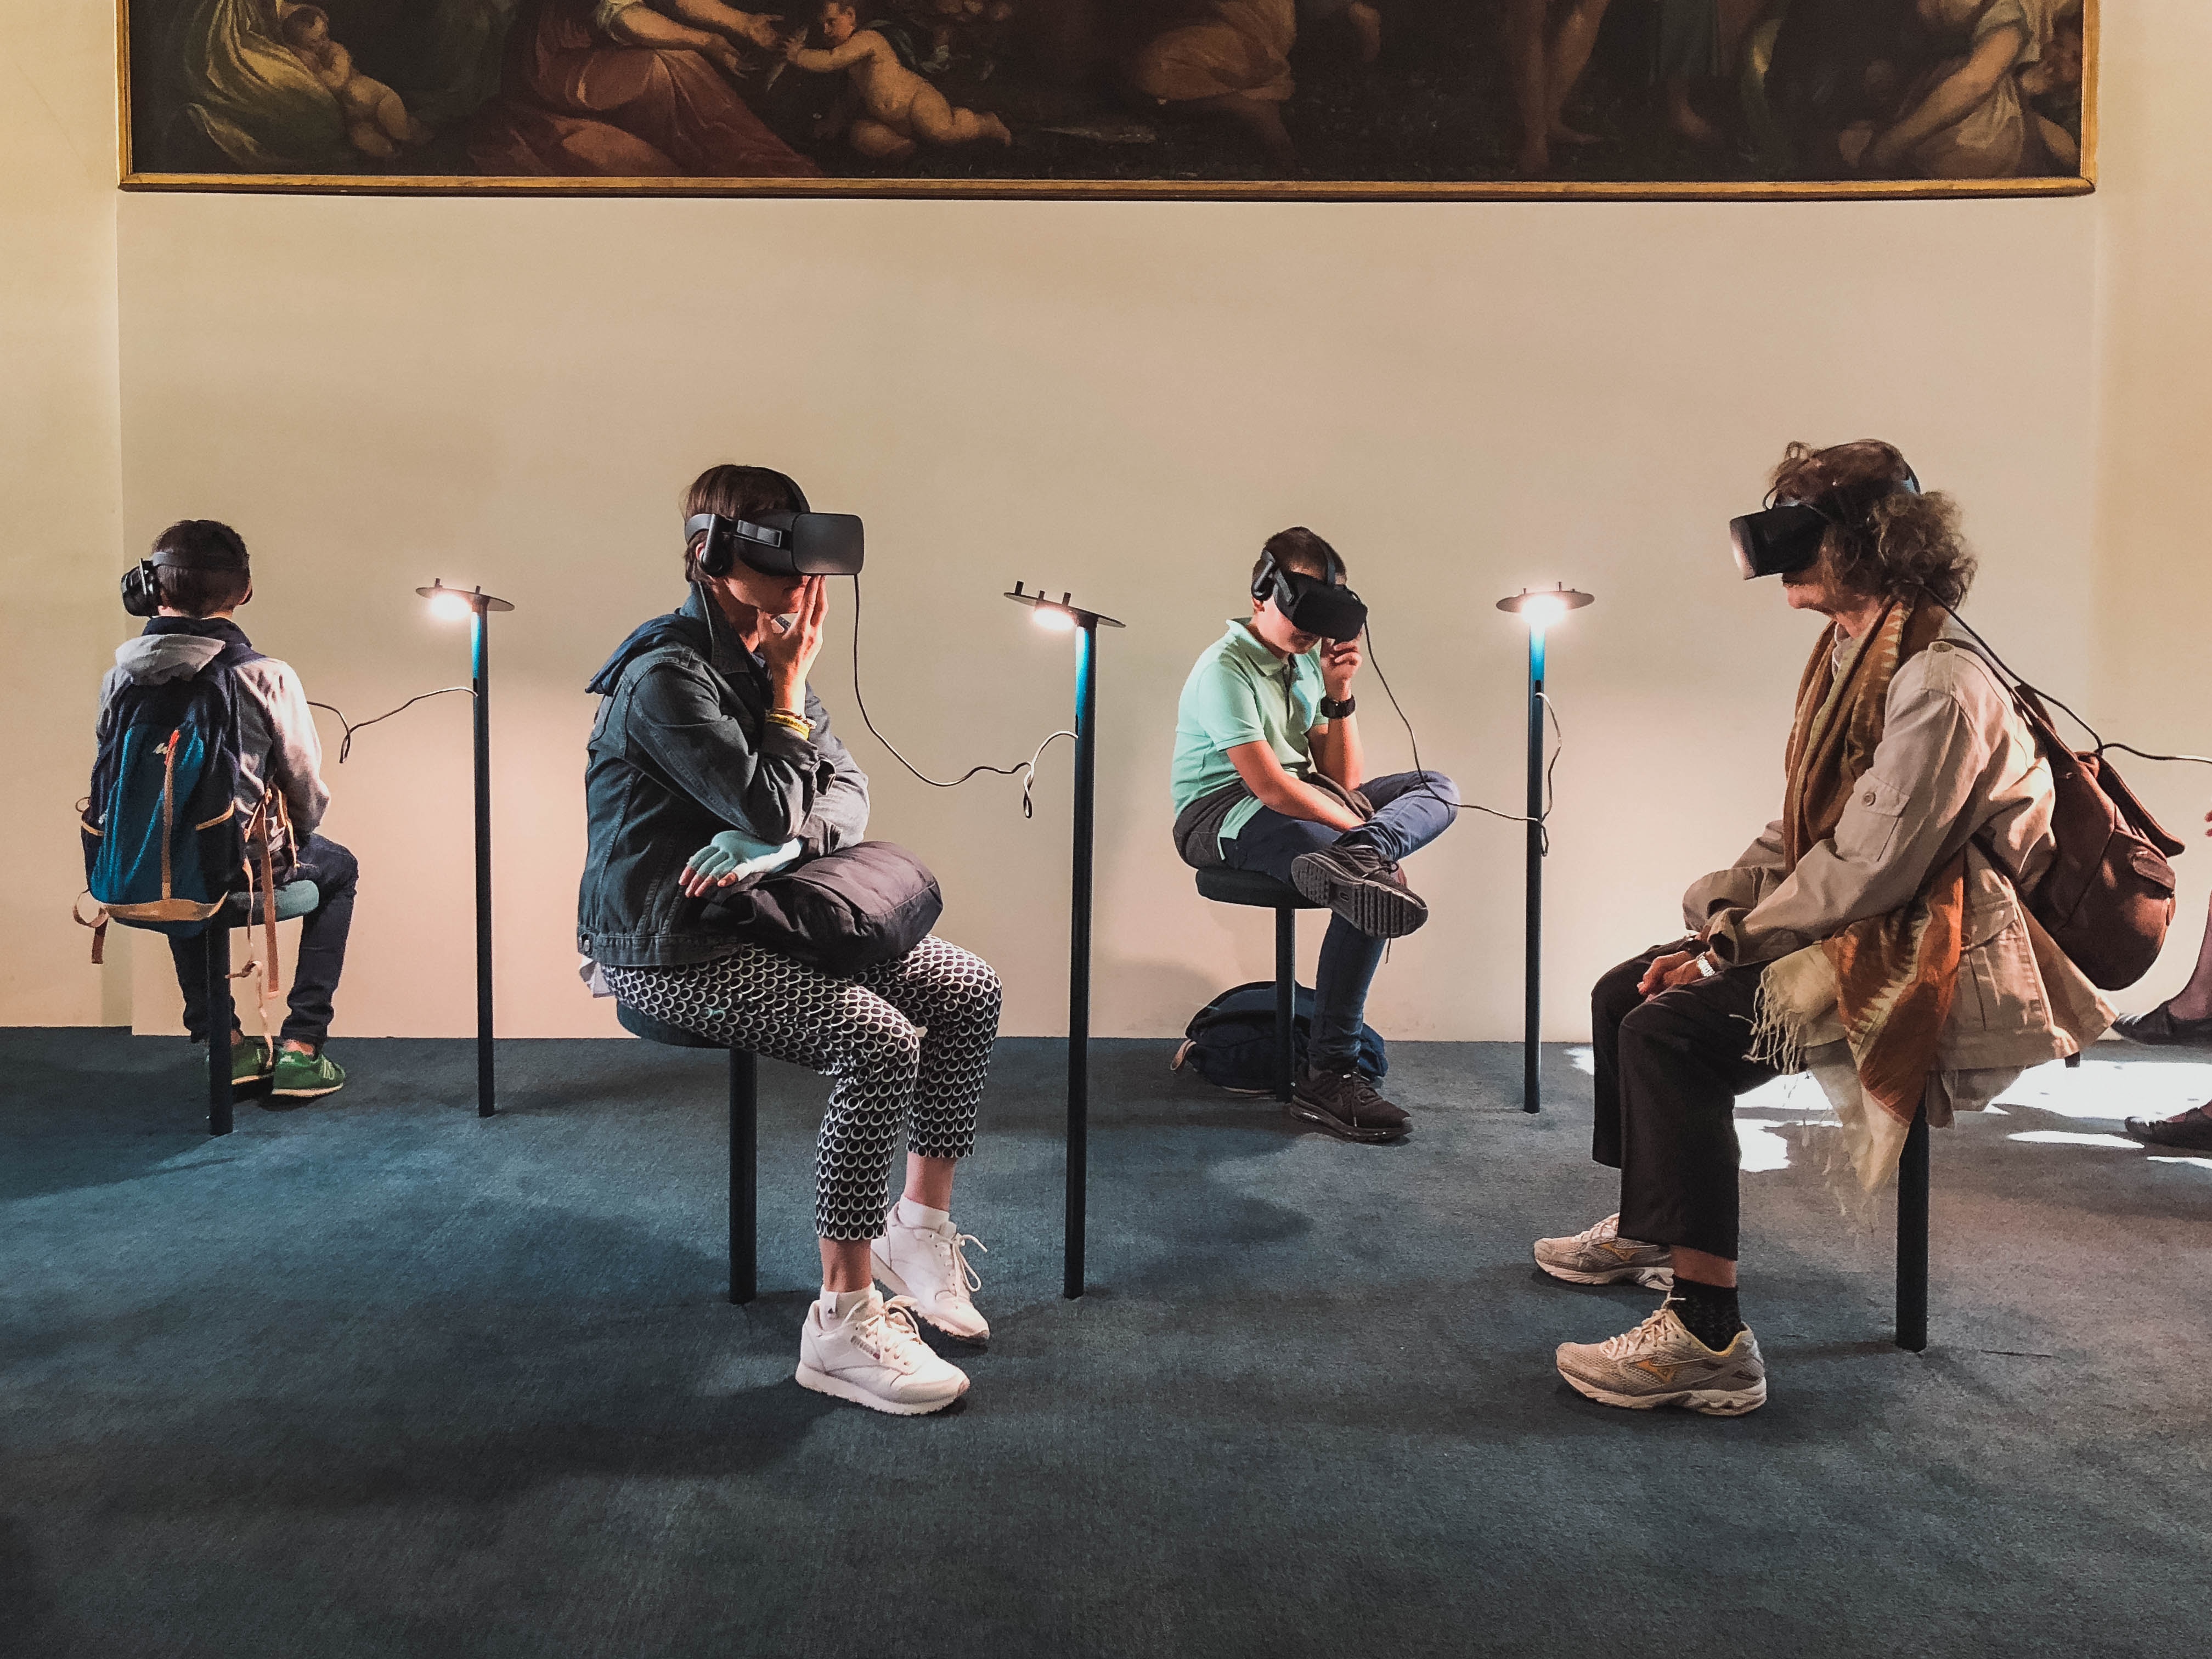 Four people sitting in a room experiencing 360 video content on a VR headset